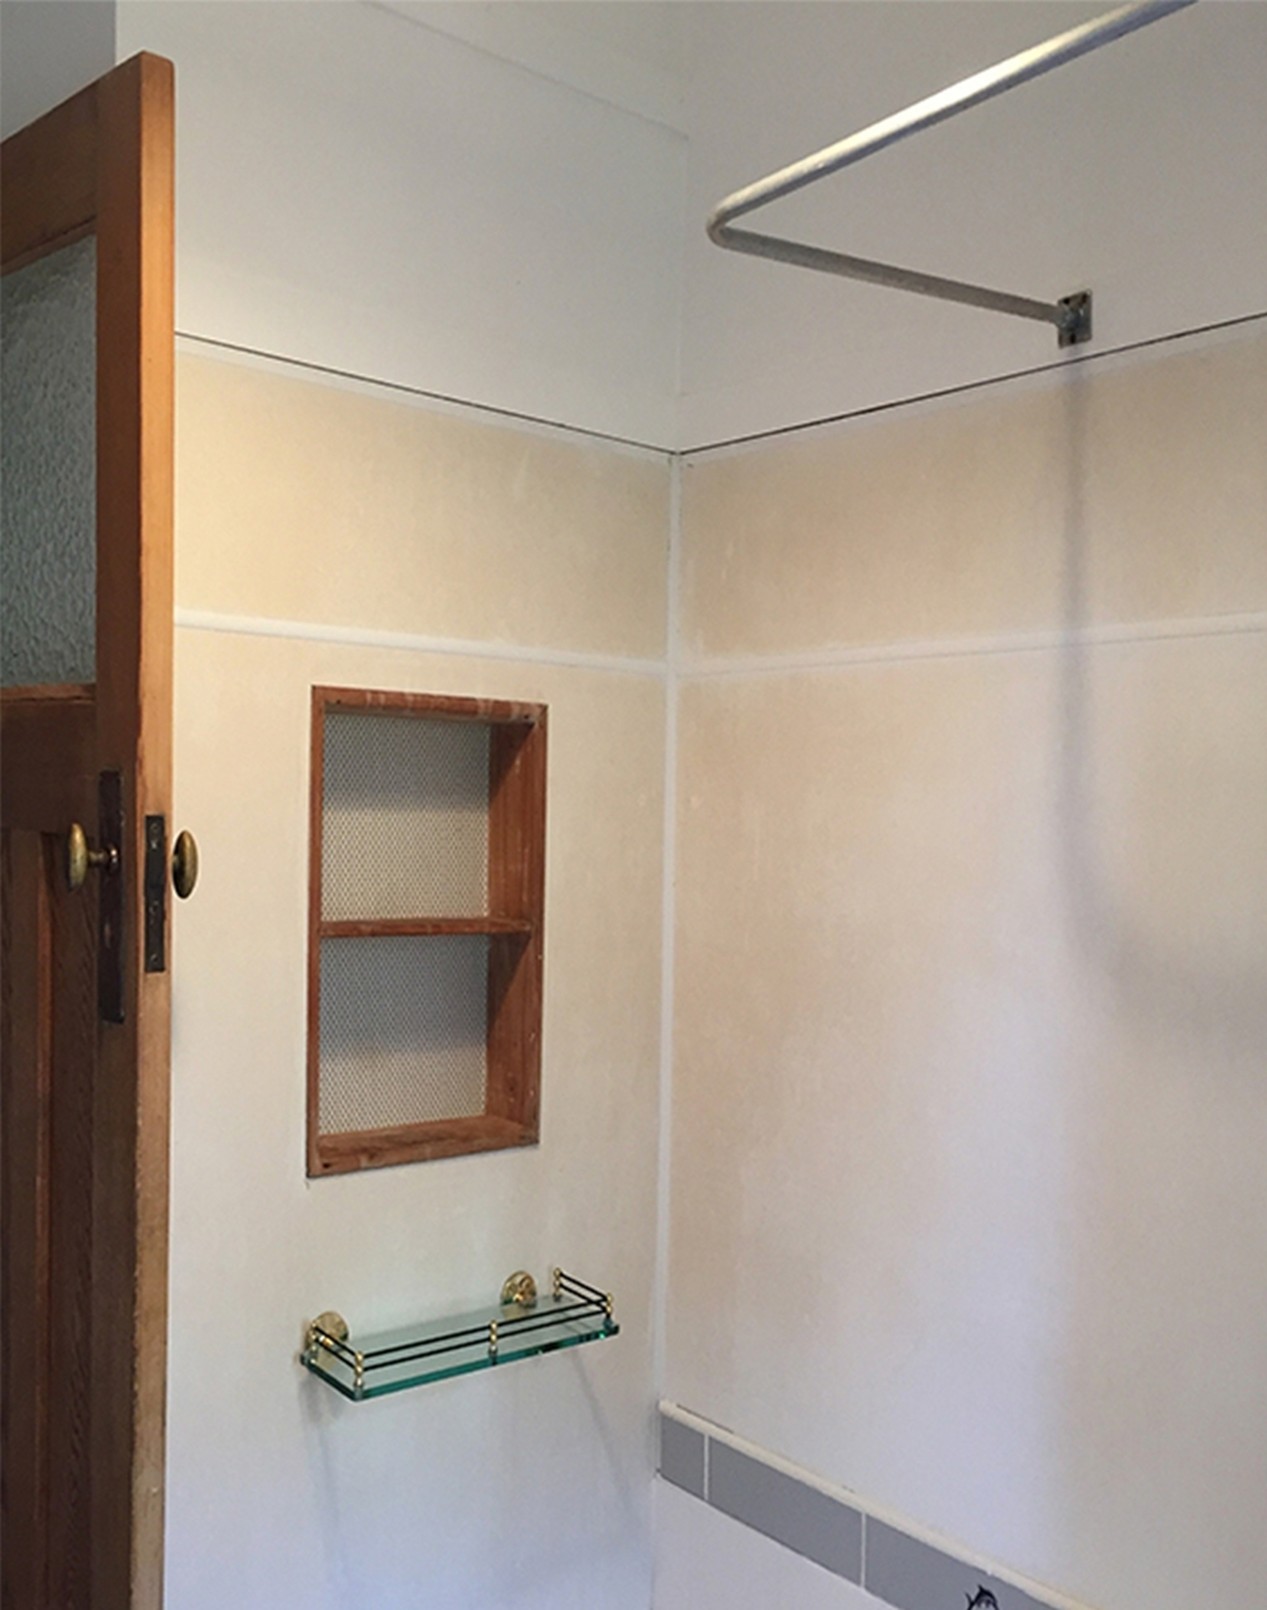 Before and after partial bathroom remodeling